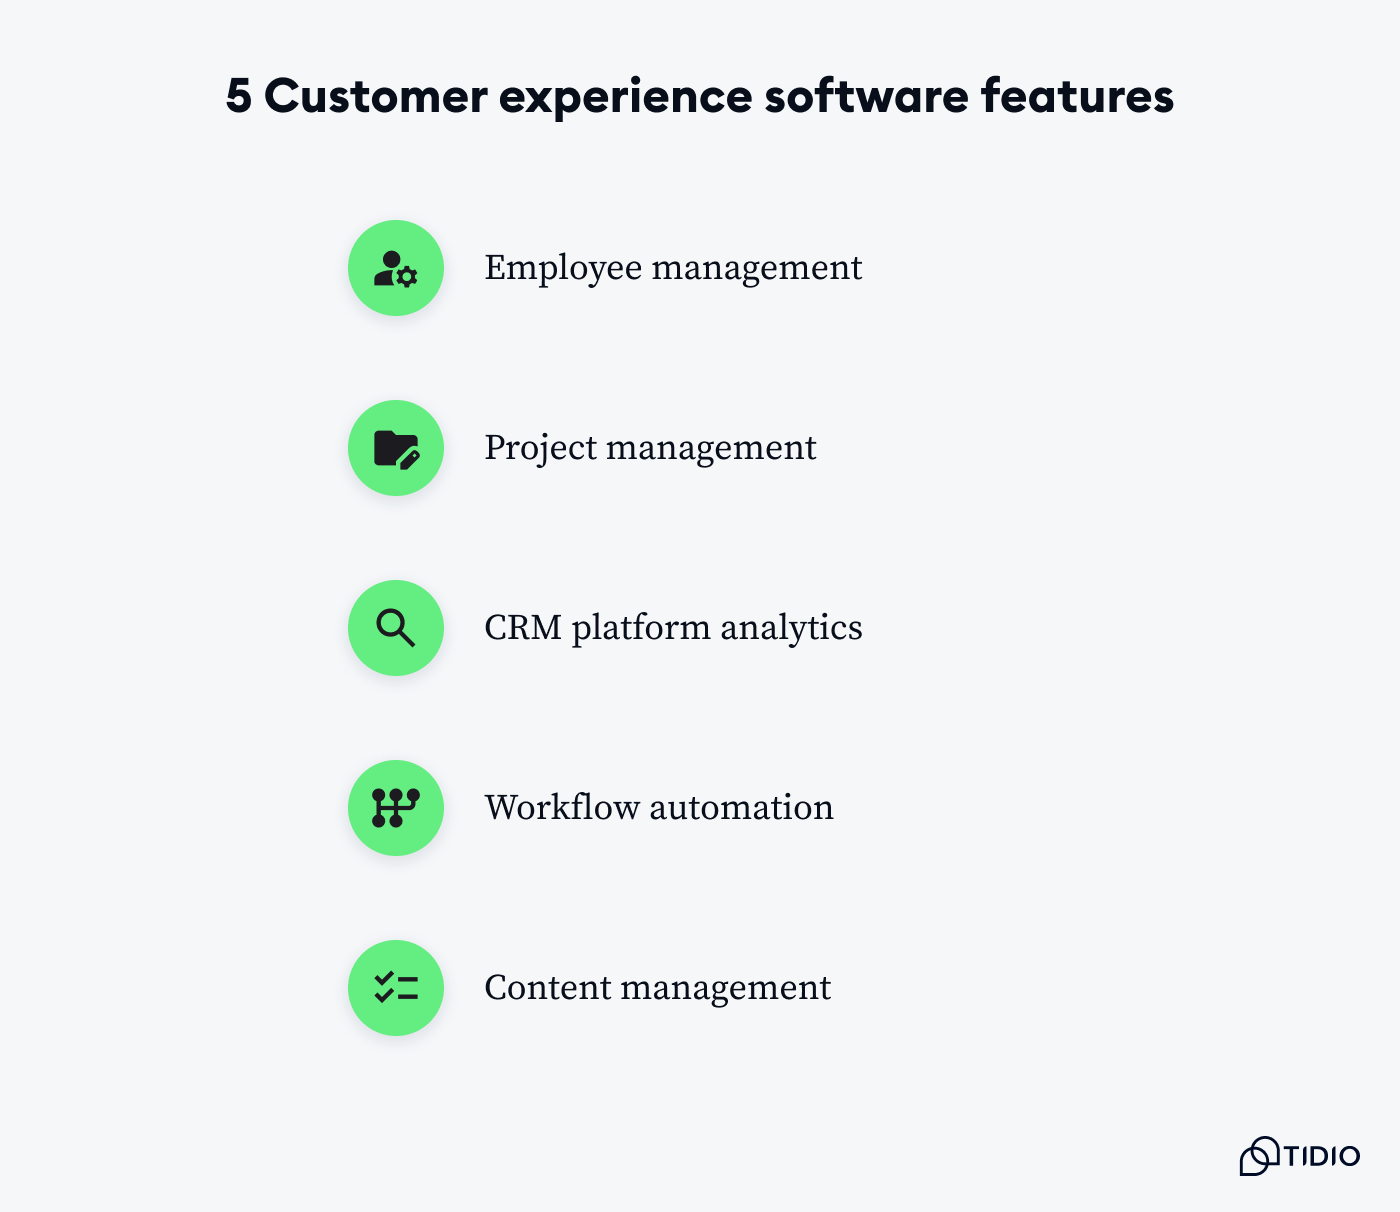 Customer experience software features